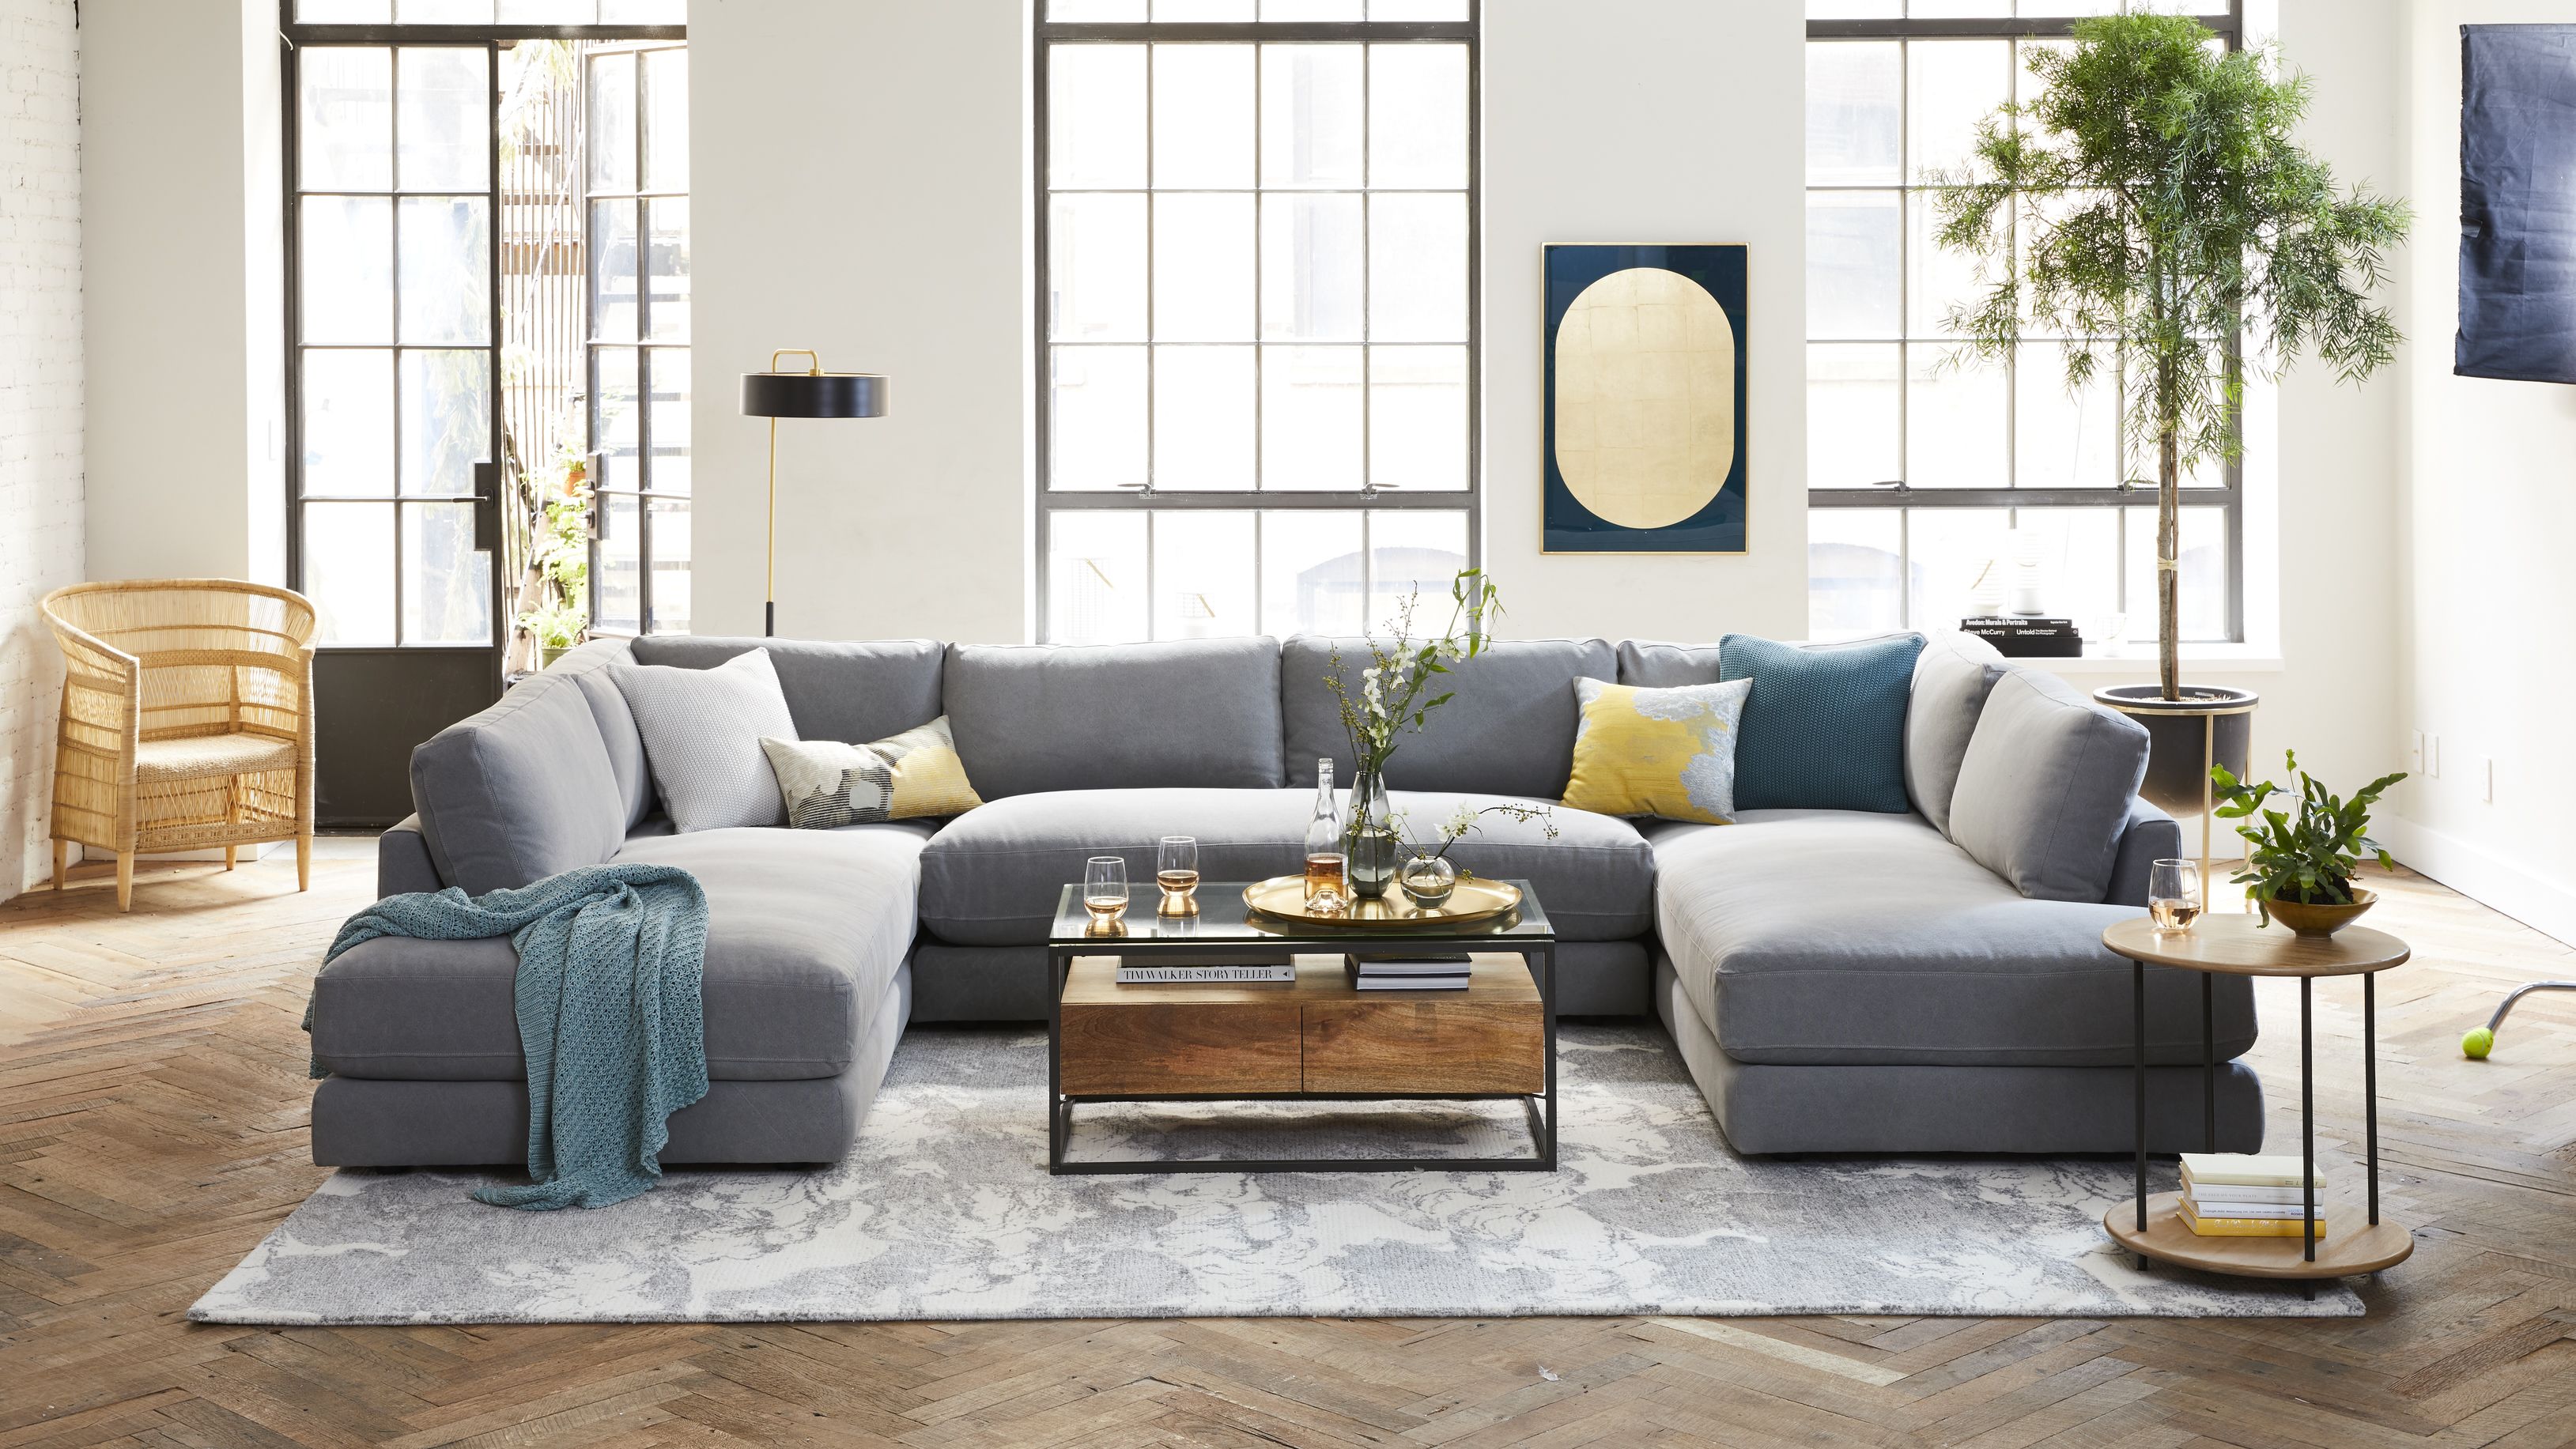 Global design home retailer West Elm launches in India